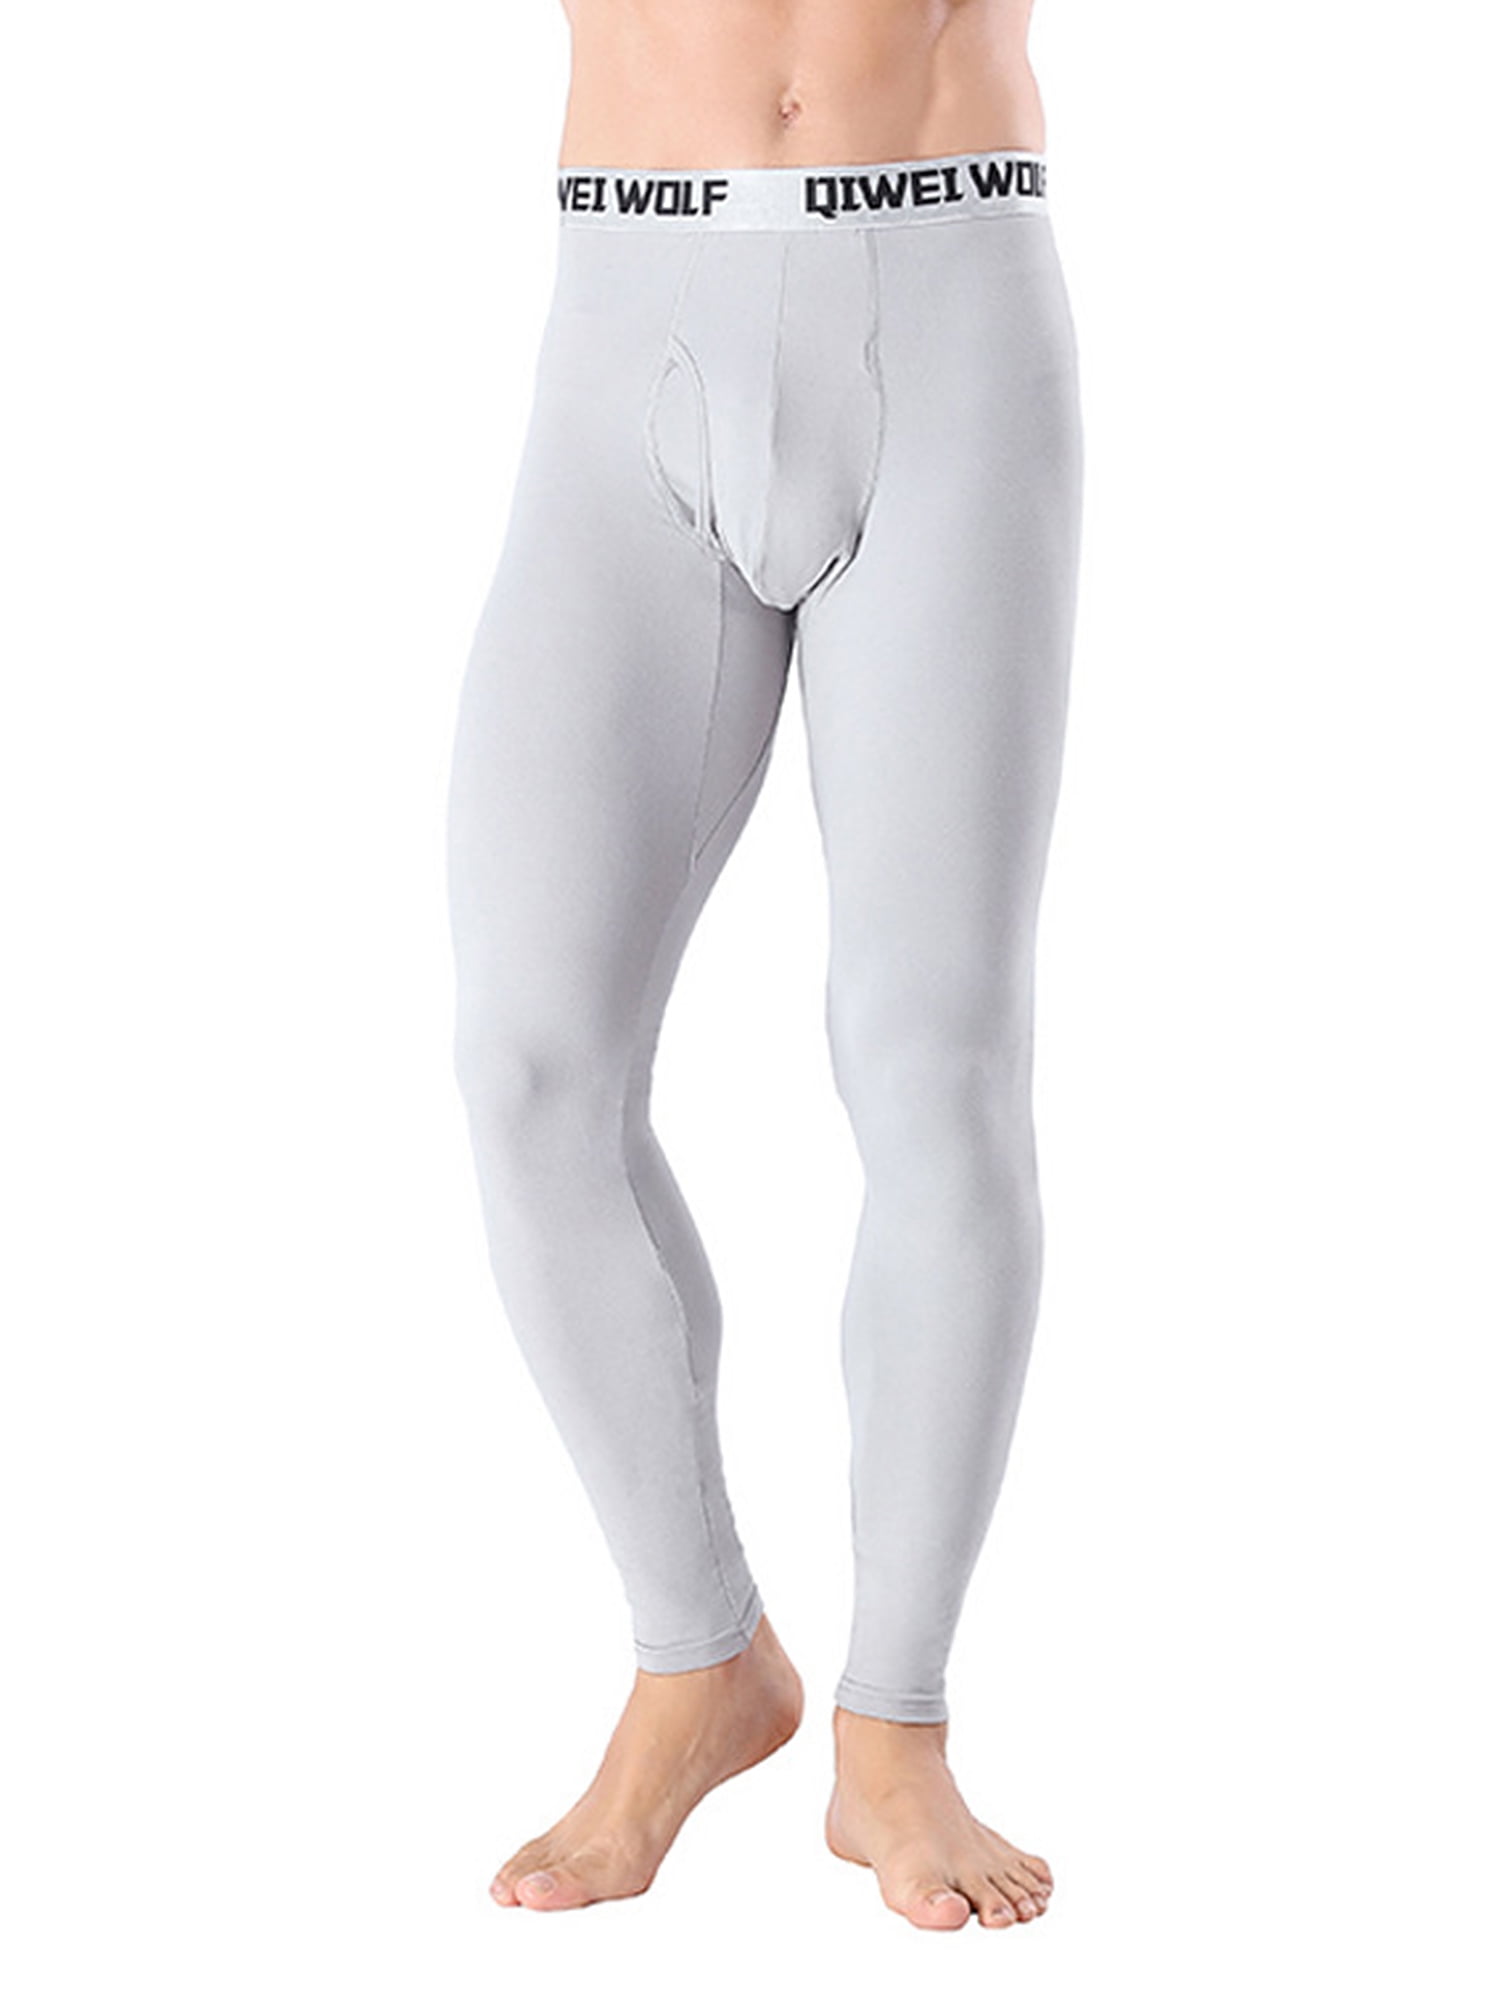 Men's Long Johns, One-piece Thin Tights, Warm Pants Trousers Slim